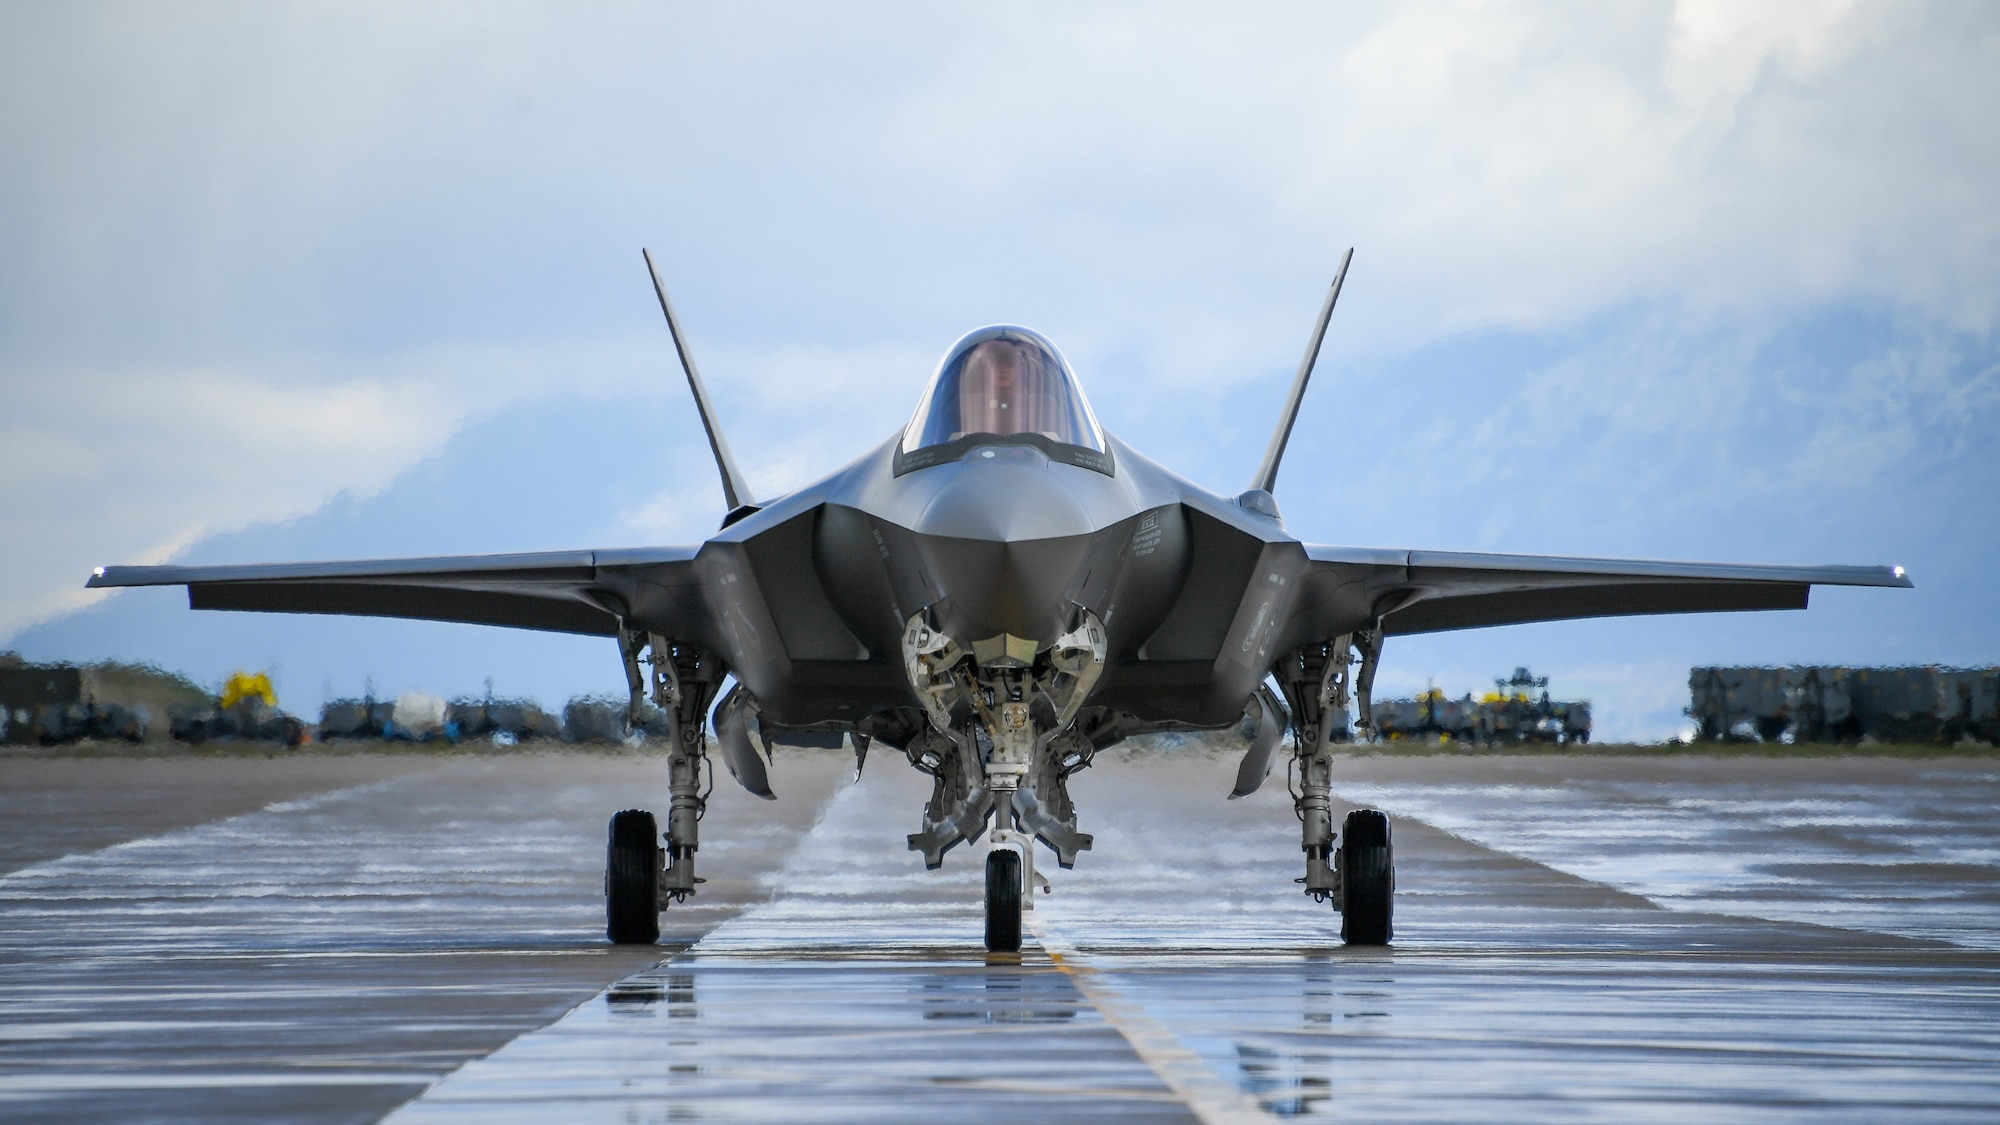 An F-35A taxis during a combat exercise at Hill Air Force Base, Utah, May 1, 2019. The active duty 388th Fighter Wing and Reserve 419th Fighter Wing, along with F-16 units from Holloman AFB, New Mexico, and Kunsan Air Base, Korea, conducted an integrated combat exercise where maintainers were tasked to continually provide ready aircraft and pilots took off in waves to simulate a large force engagement with enemy aircraft. (U.S. Air Force photo by R. Nial Bradshaw)